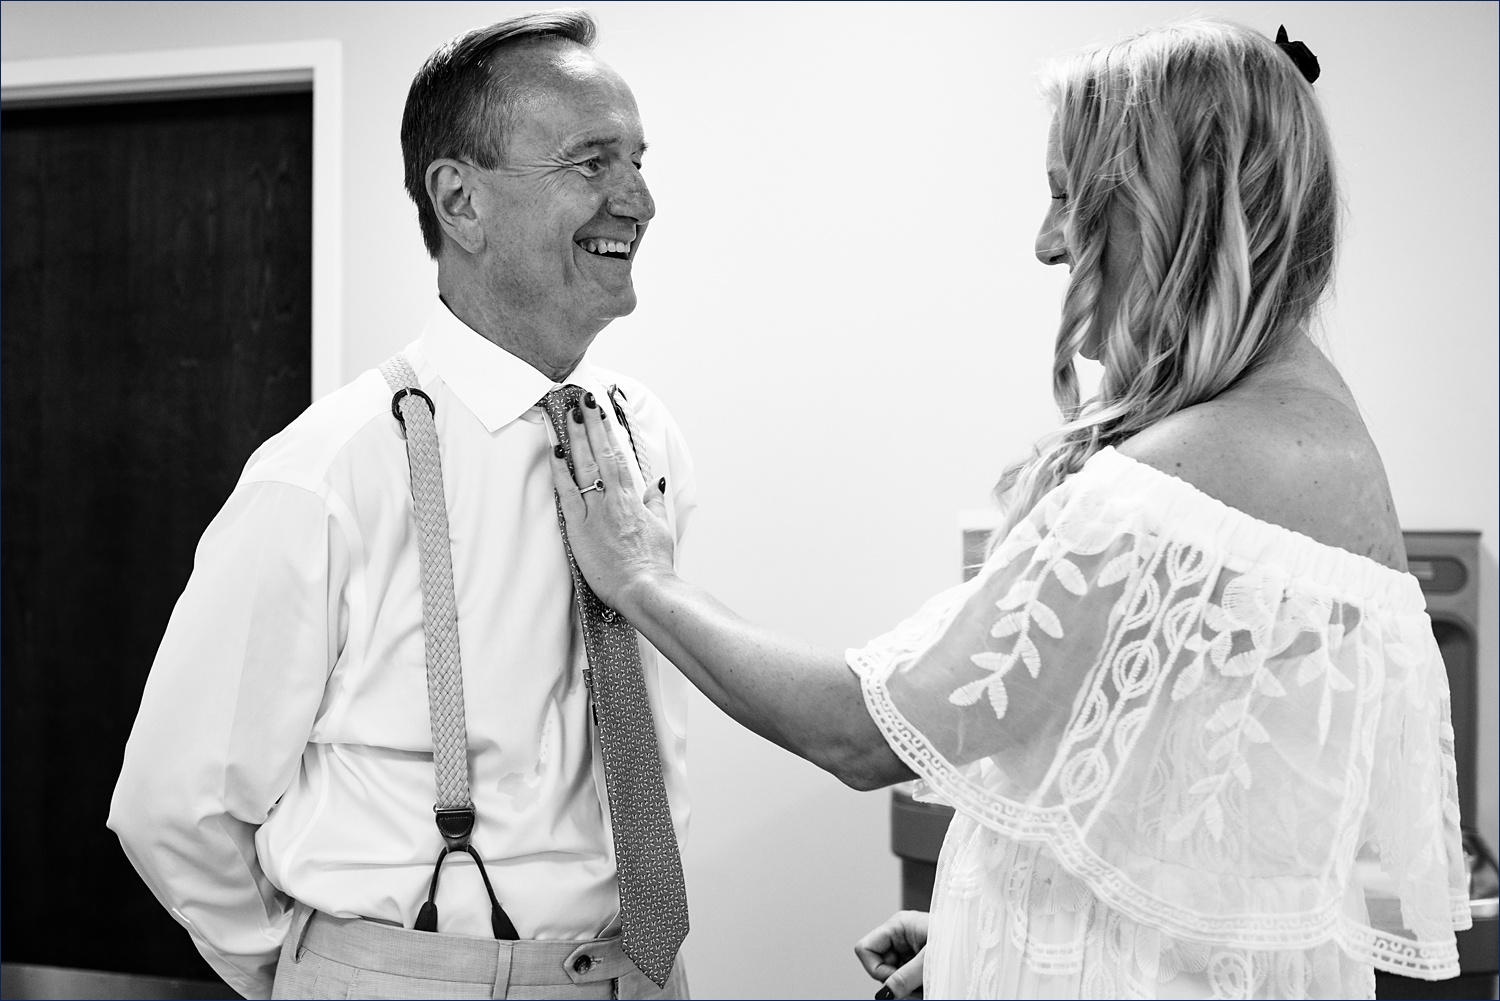 The bride gets her dad's tie all set for the wedding day